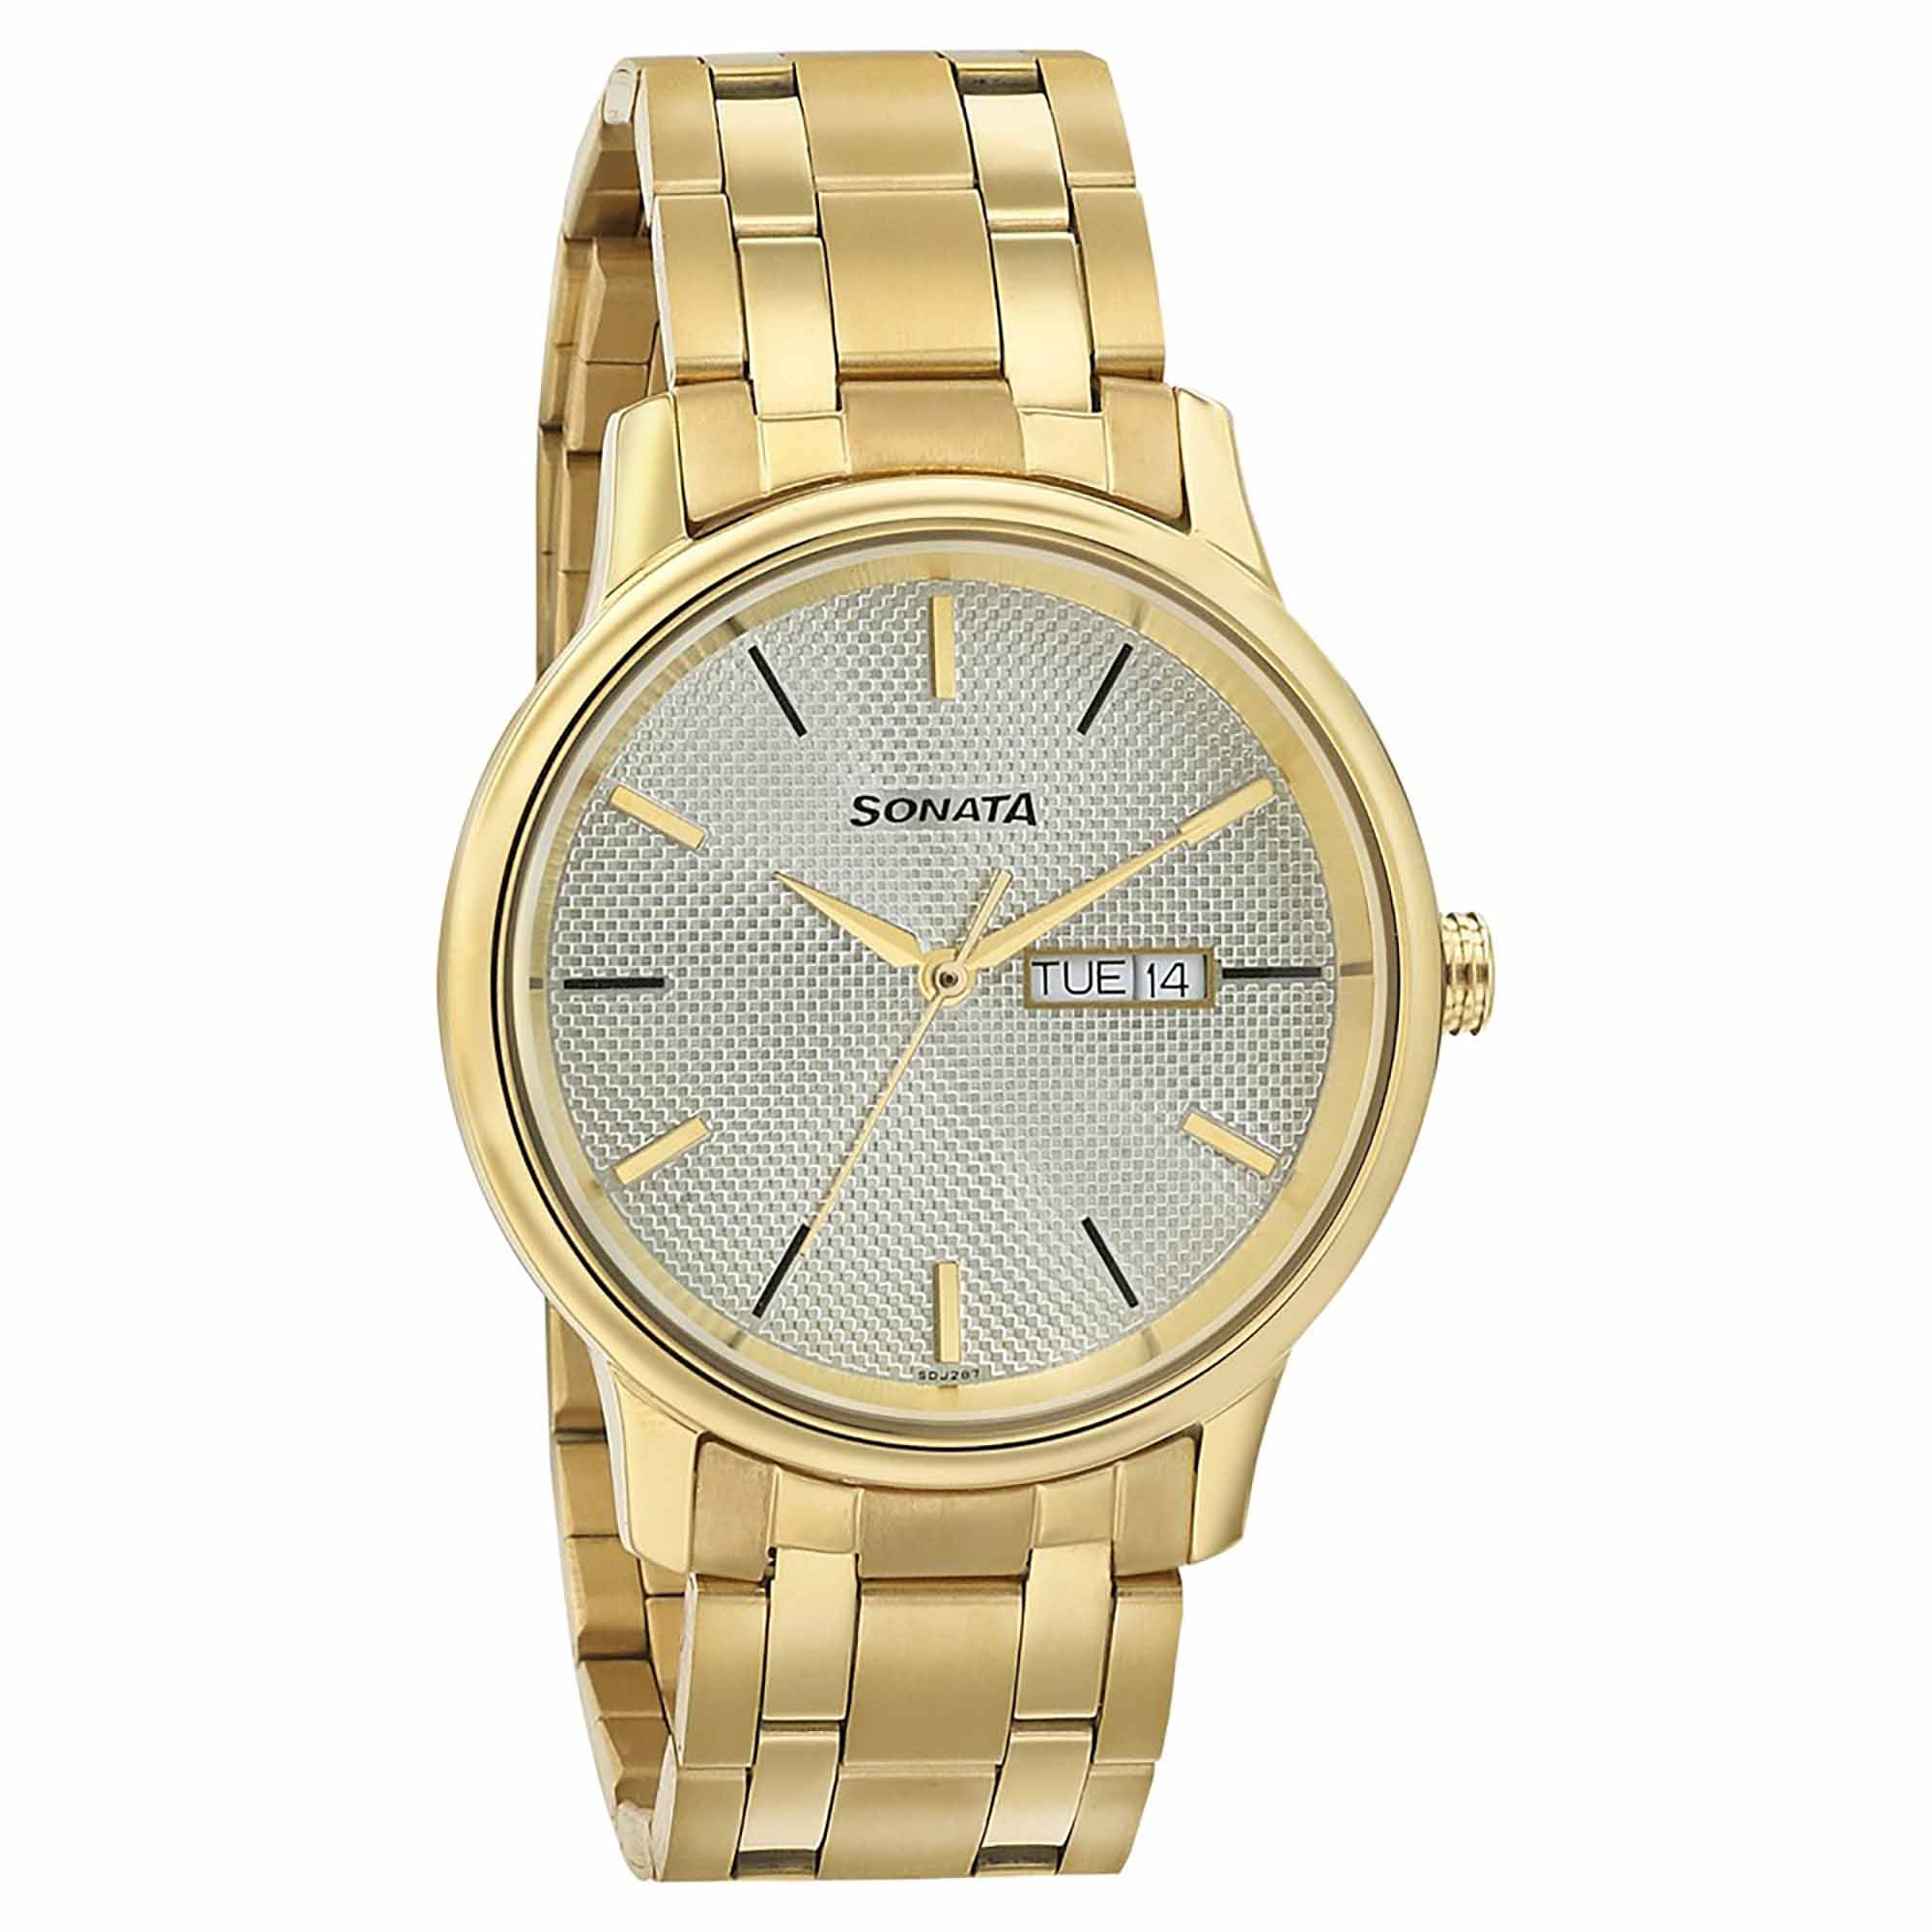 Sonata Quartz Analog with Day and Date Champagne Dial Metal Strap Watch for Men